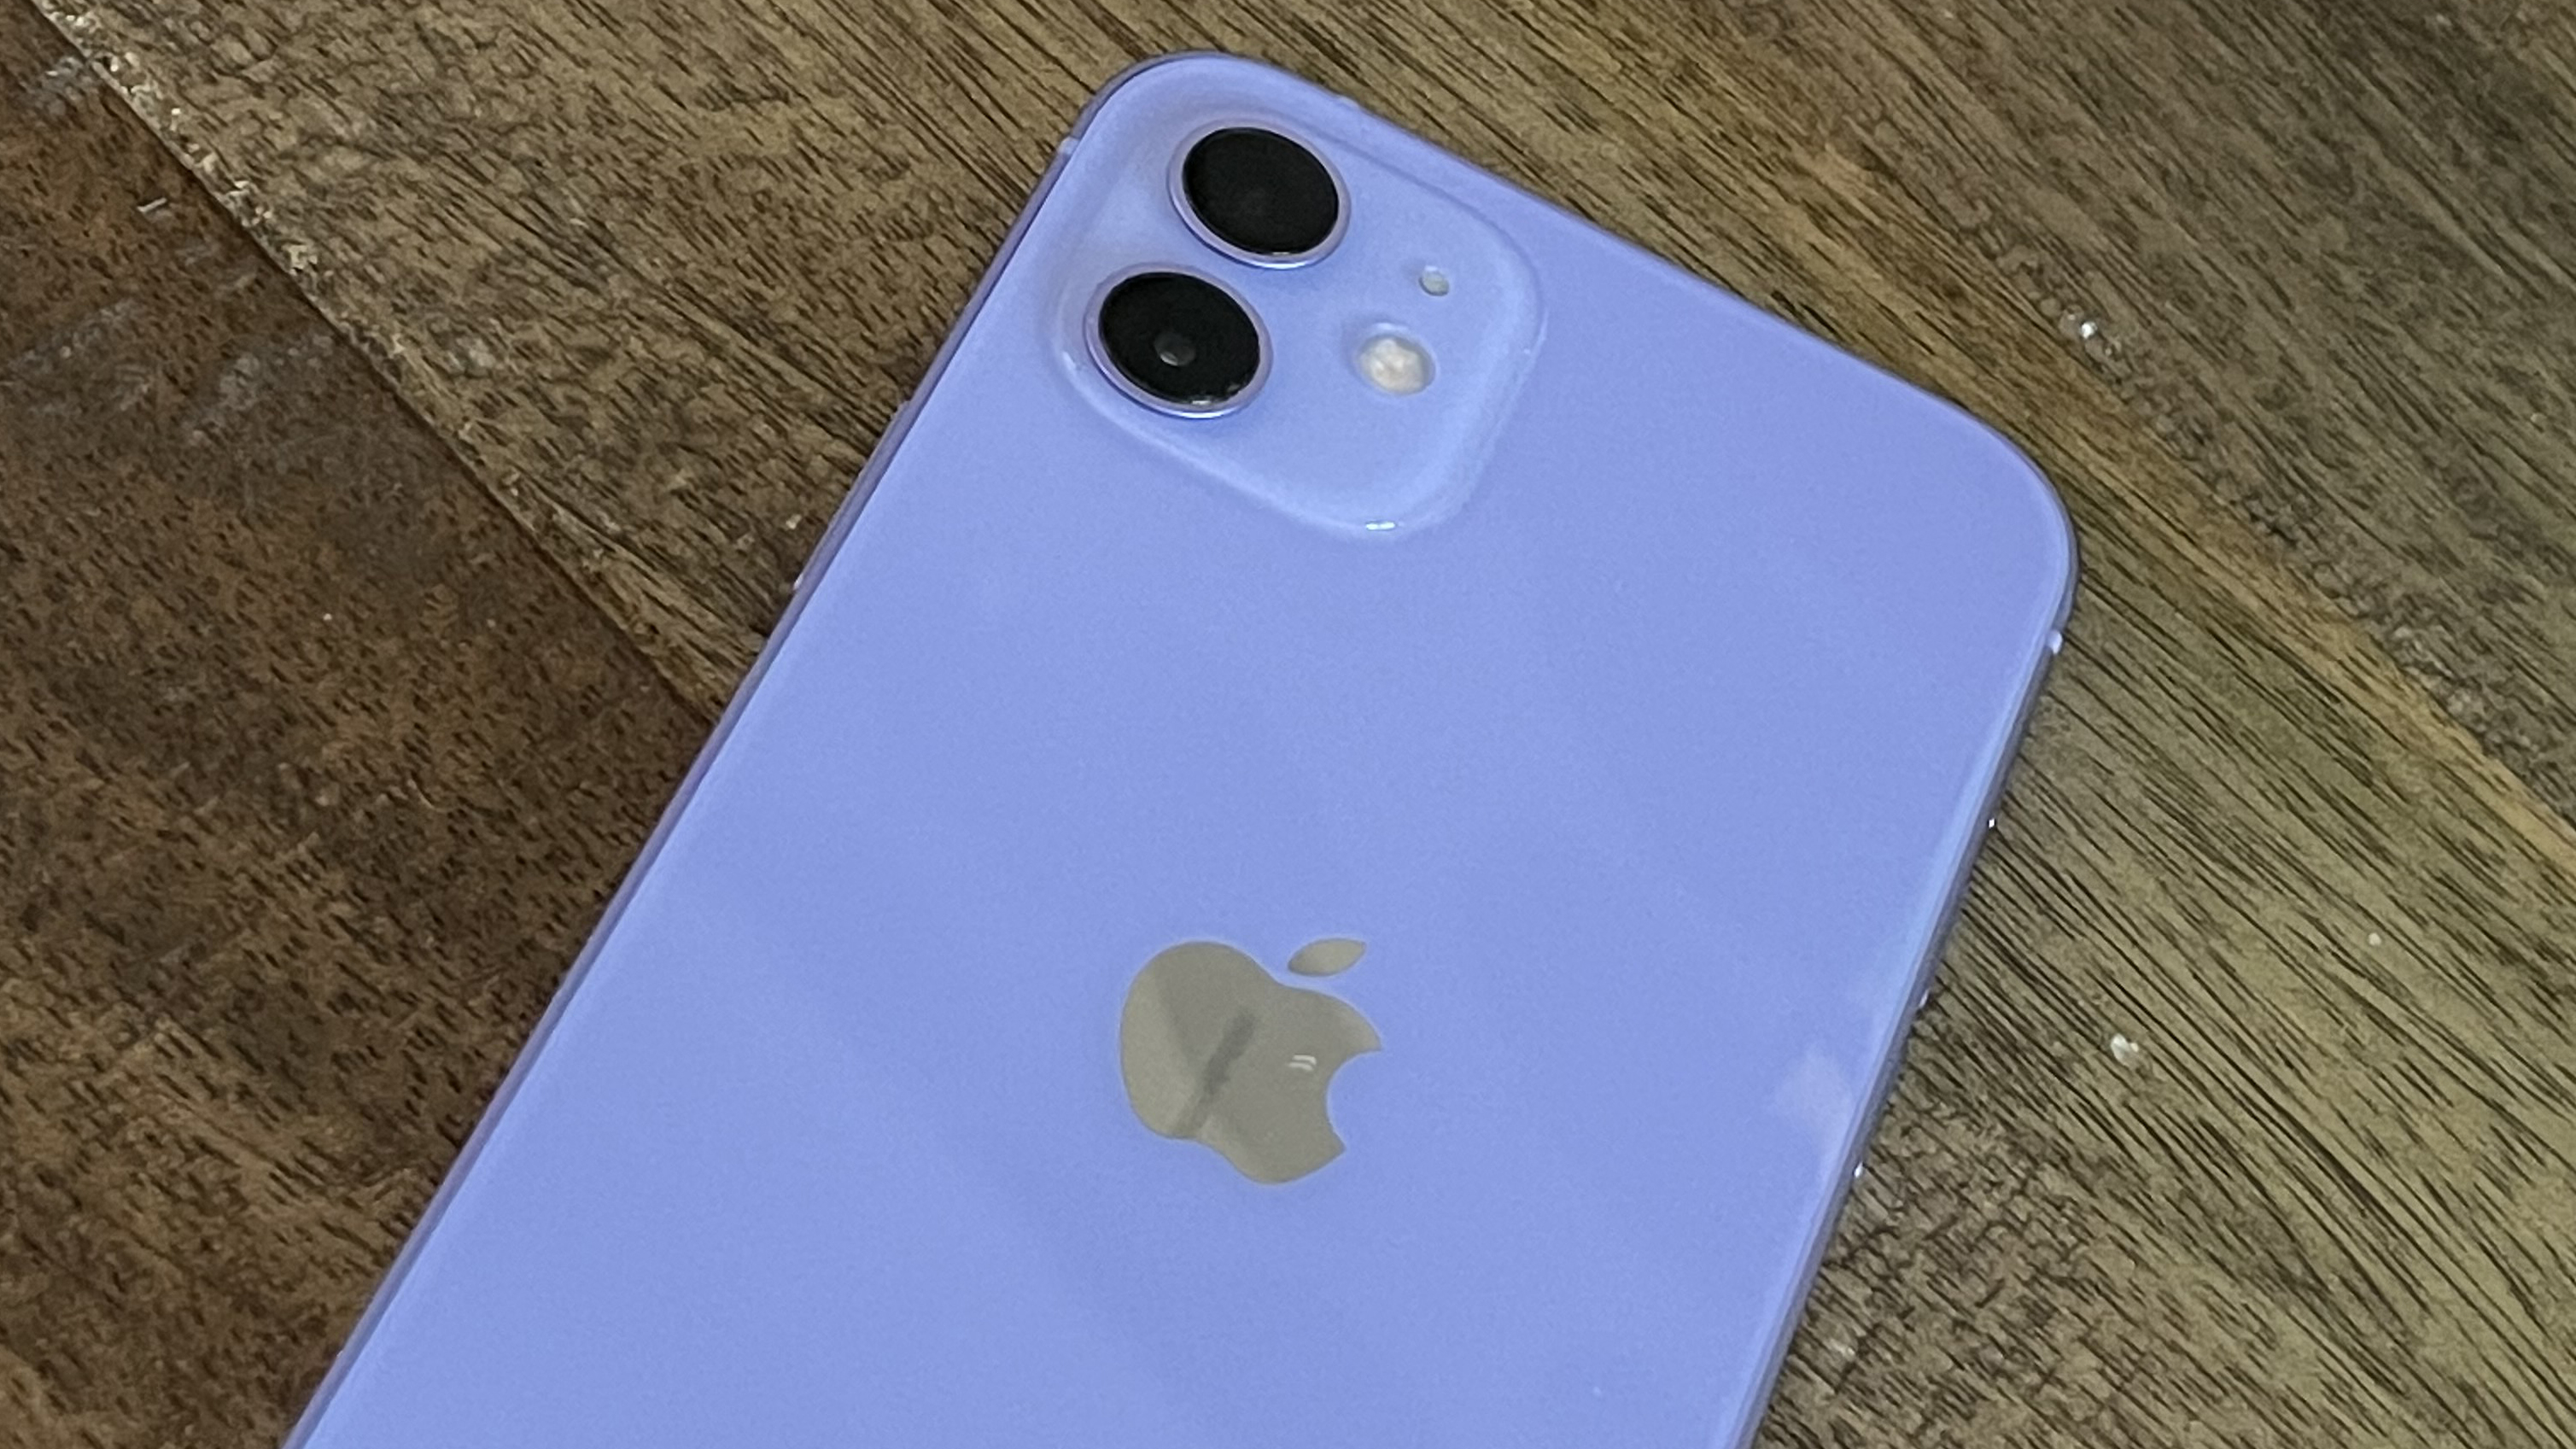 An iPhone 12 in purple on a wooden floor